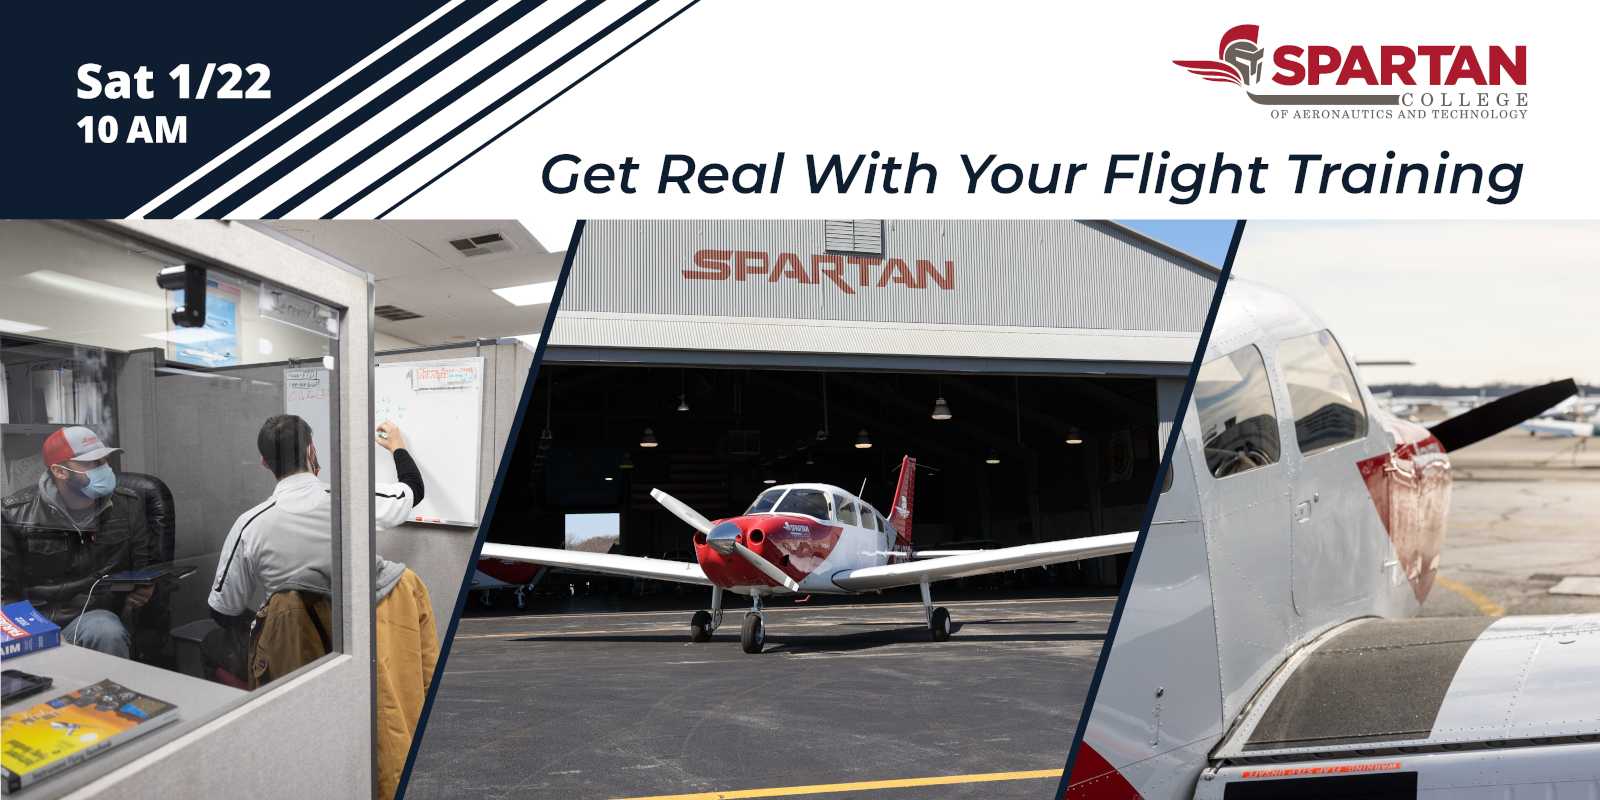 Get Real With Your Flight Training Event